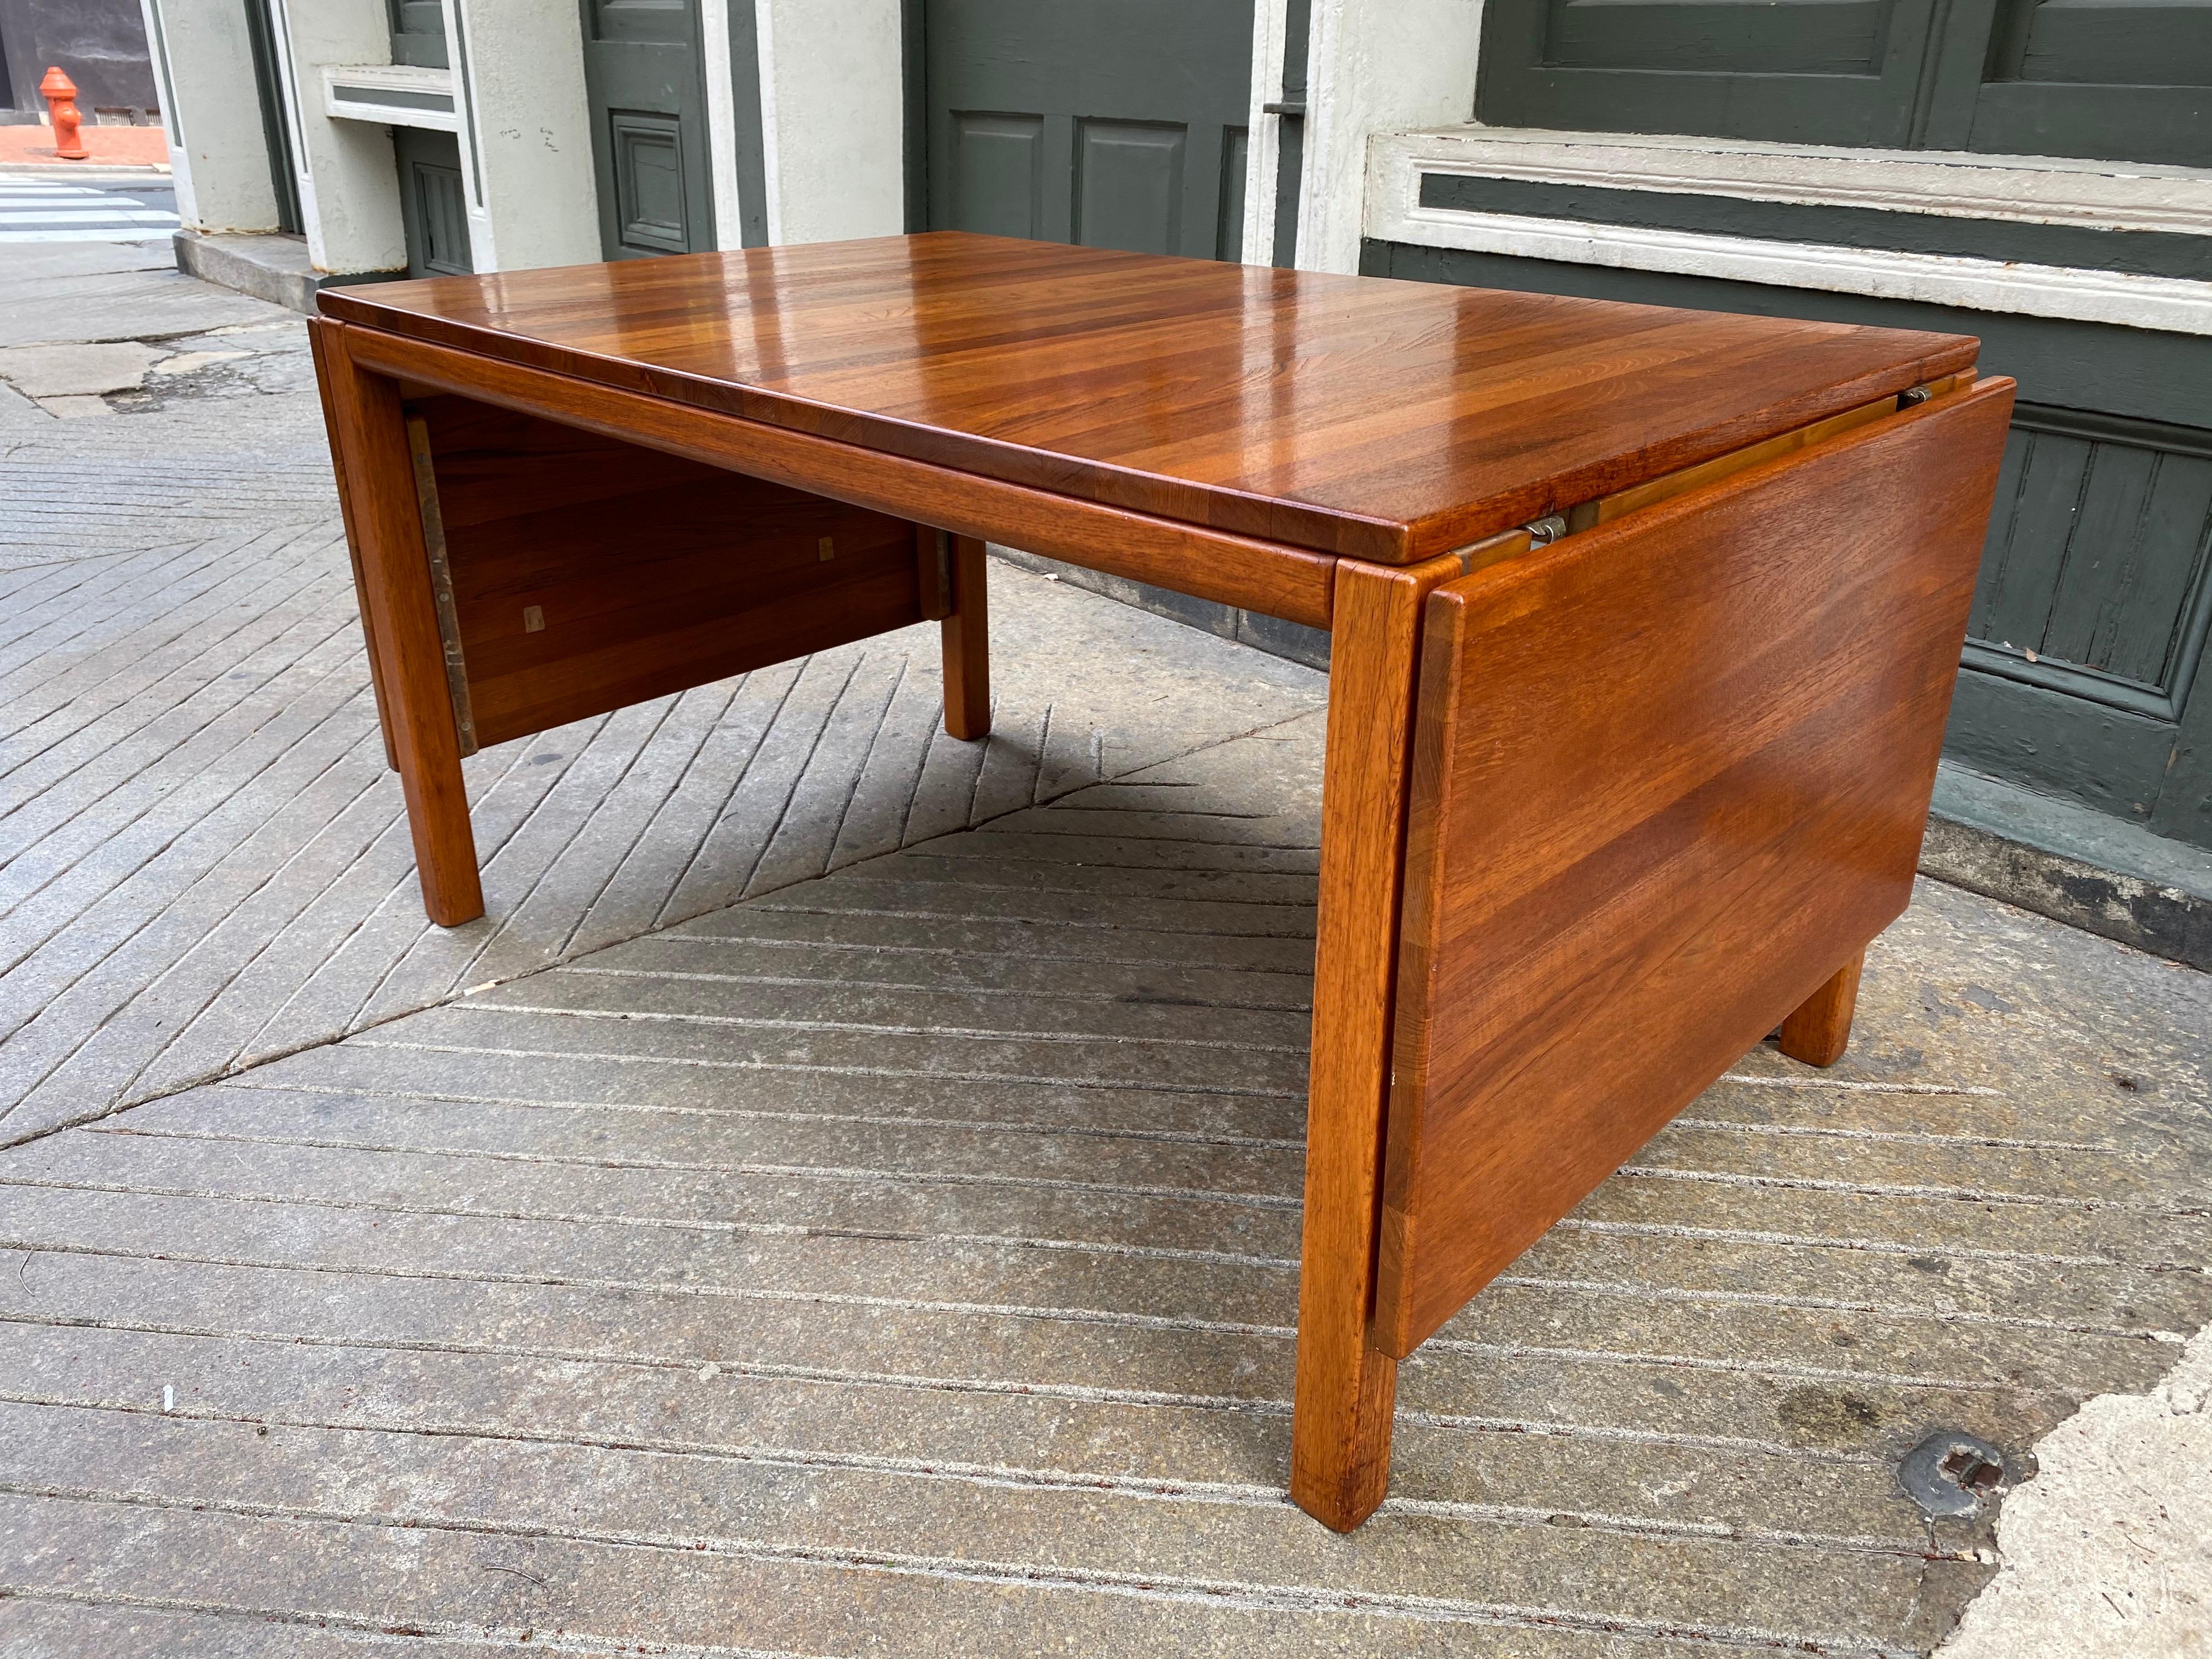 Solid teak dining table with two removable drop leaves. Perfect to use as a desk/work surface or dining! Nice size when both leaves up, measuring 90